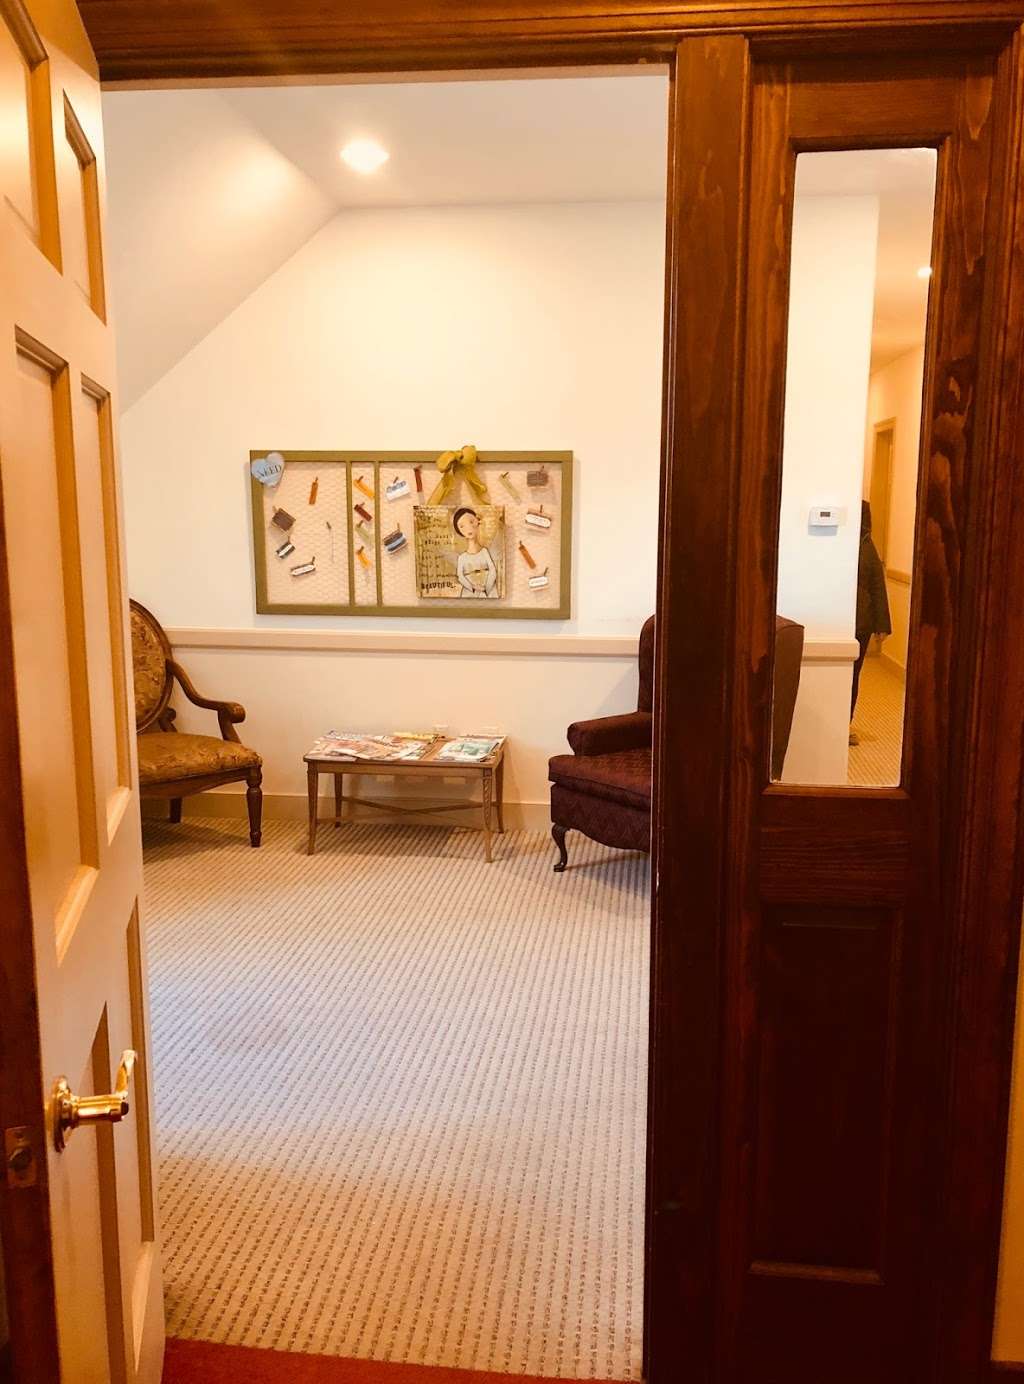 WISE MIND Ltd: Dialectical Behavior Therapy (DBT) | 400 Genesee Street, Town Bank Building, Suite C, Historic Downtown Delafield Business District, Delafield, WI 53018 | Phone: (262) 744-5201